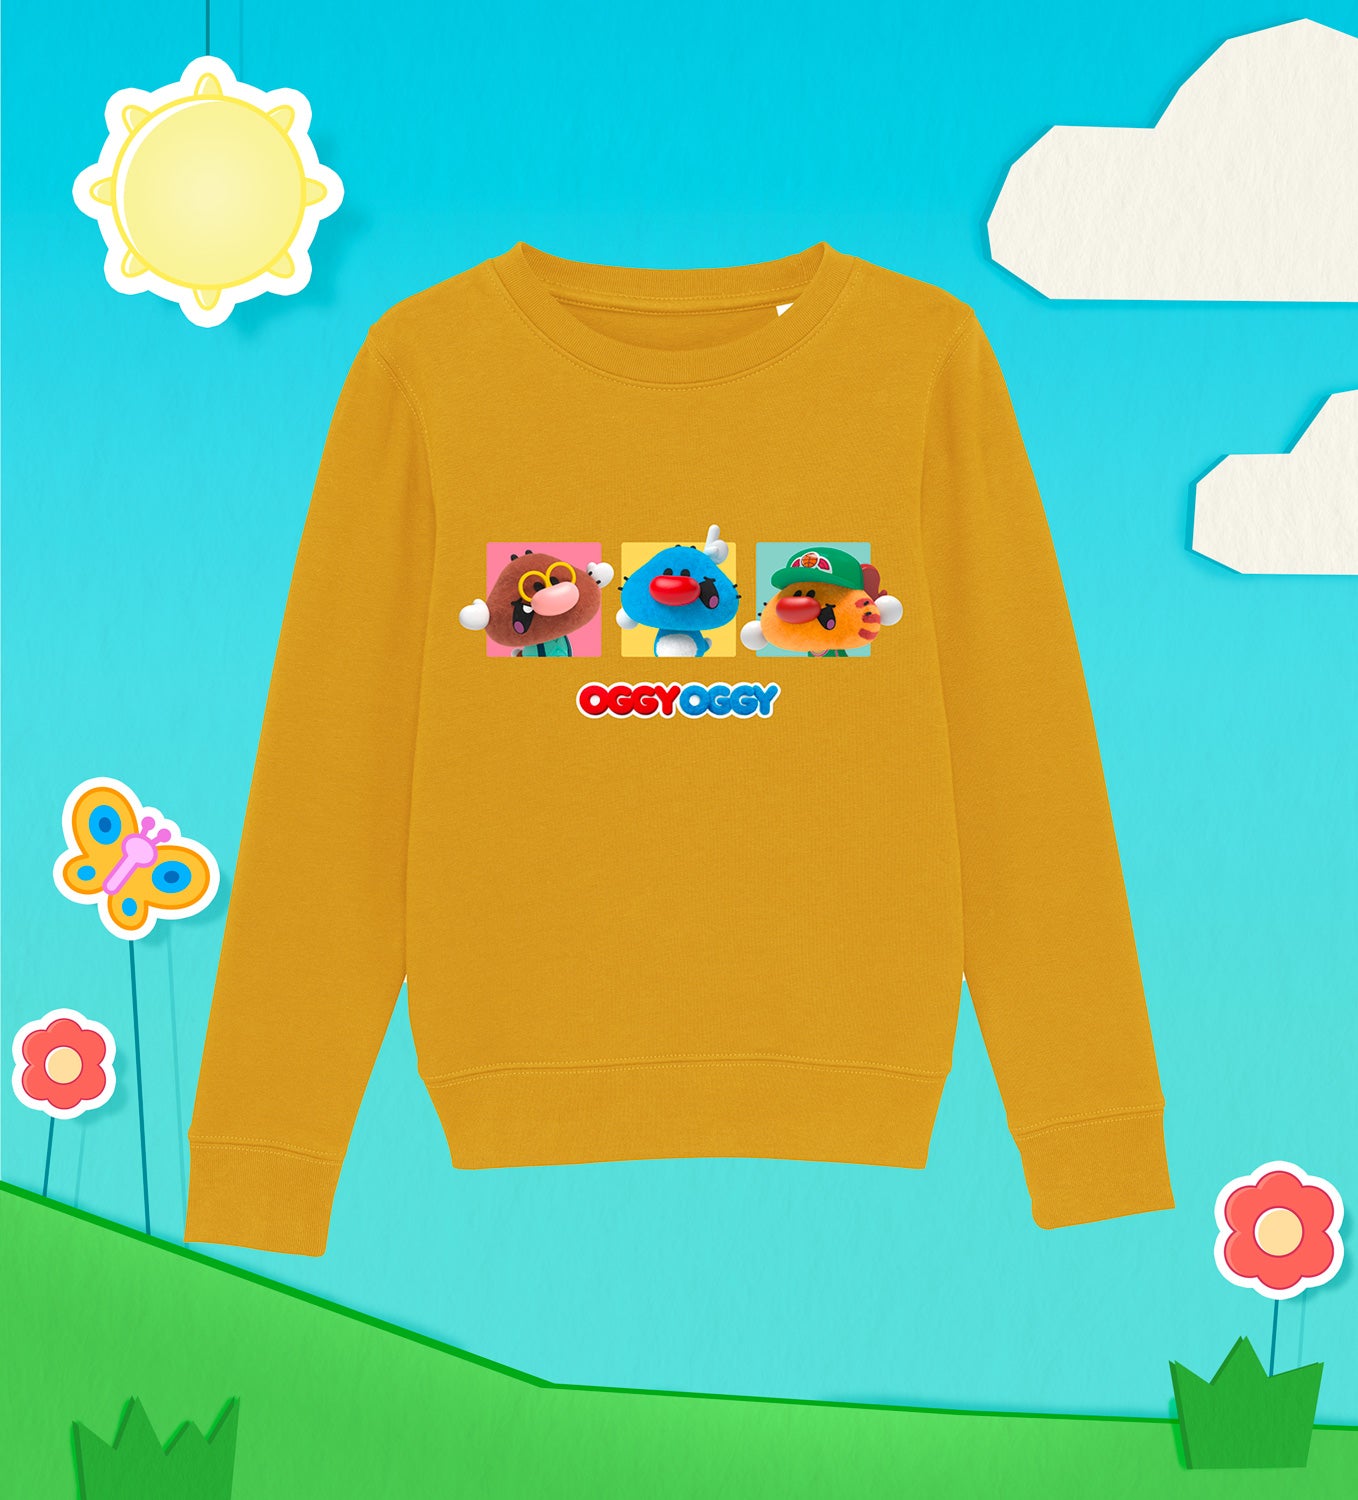 OGGY OGGY and his friends Kids Cotton Sweatshirt 